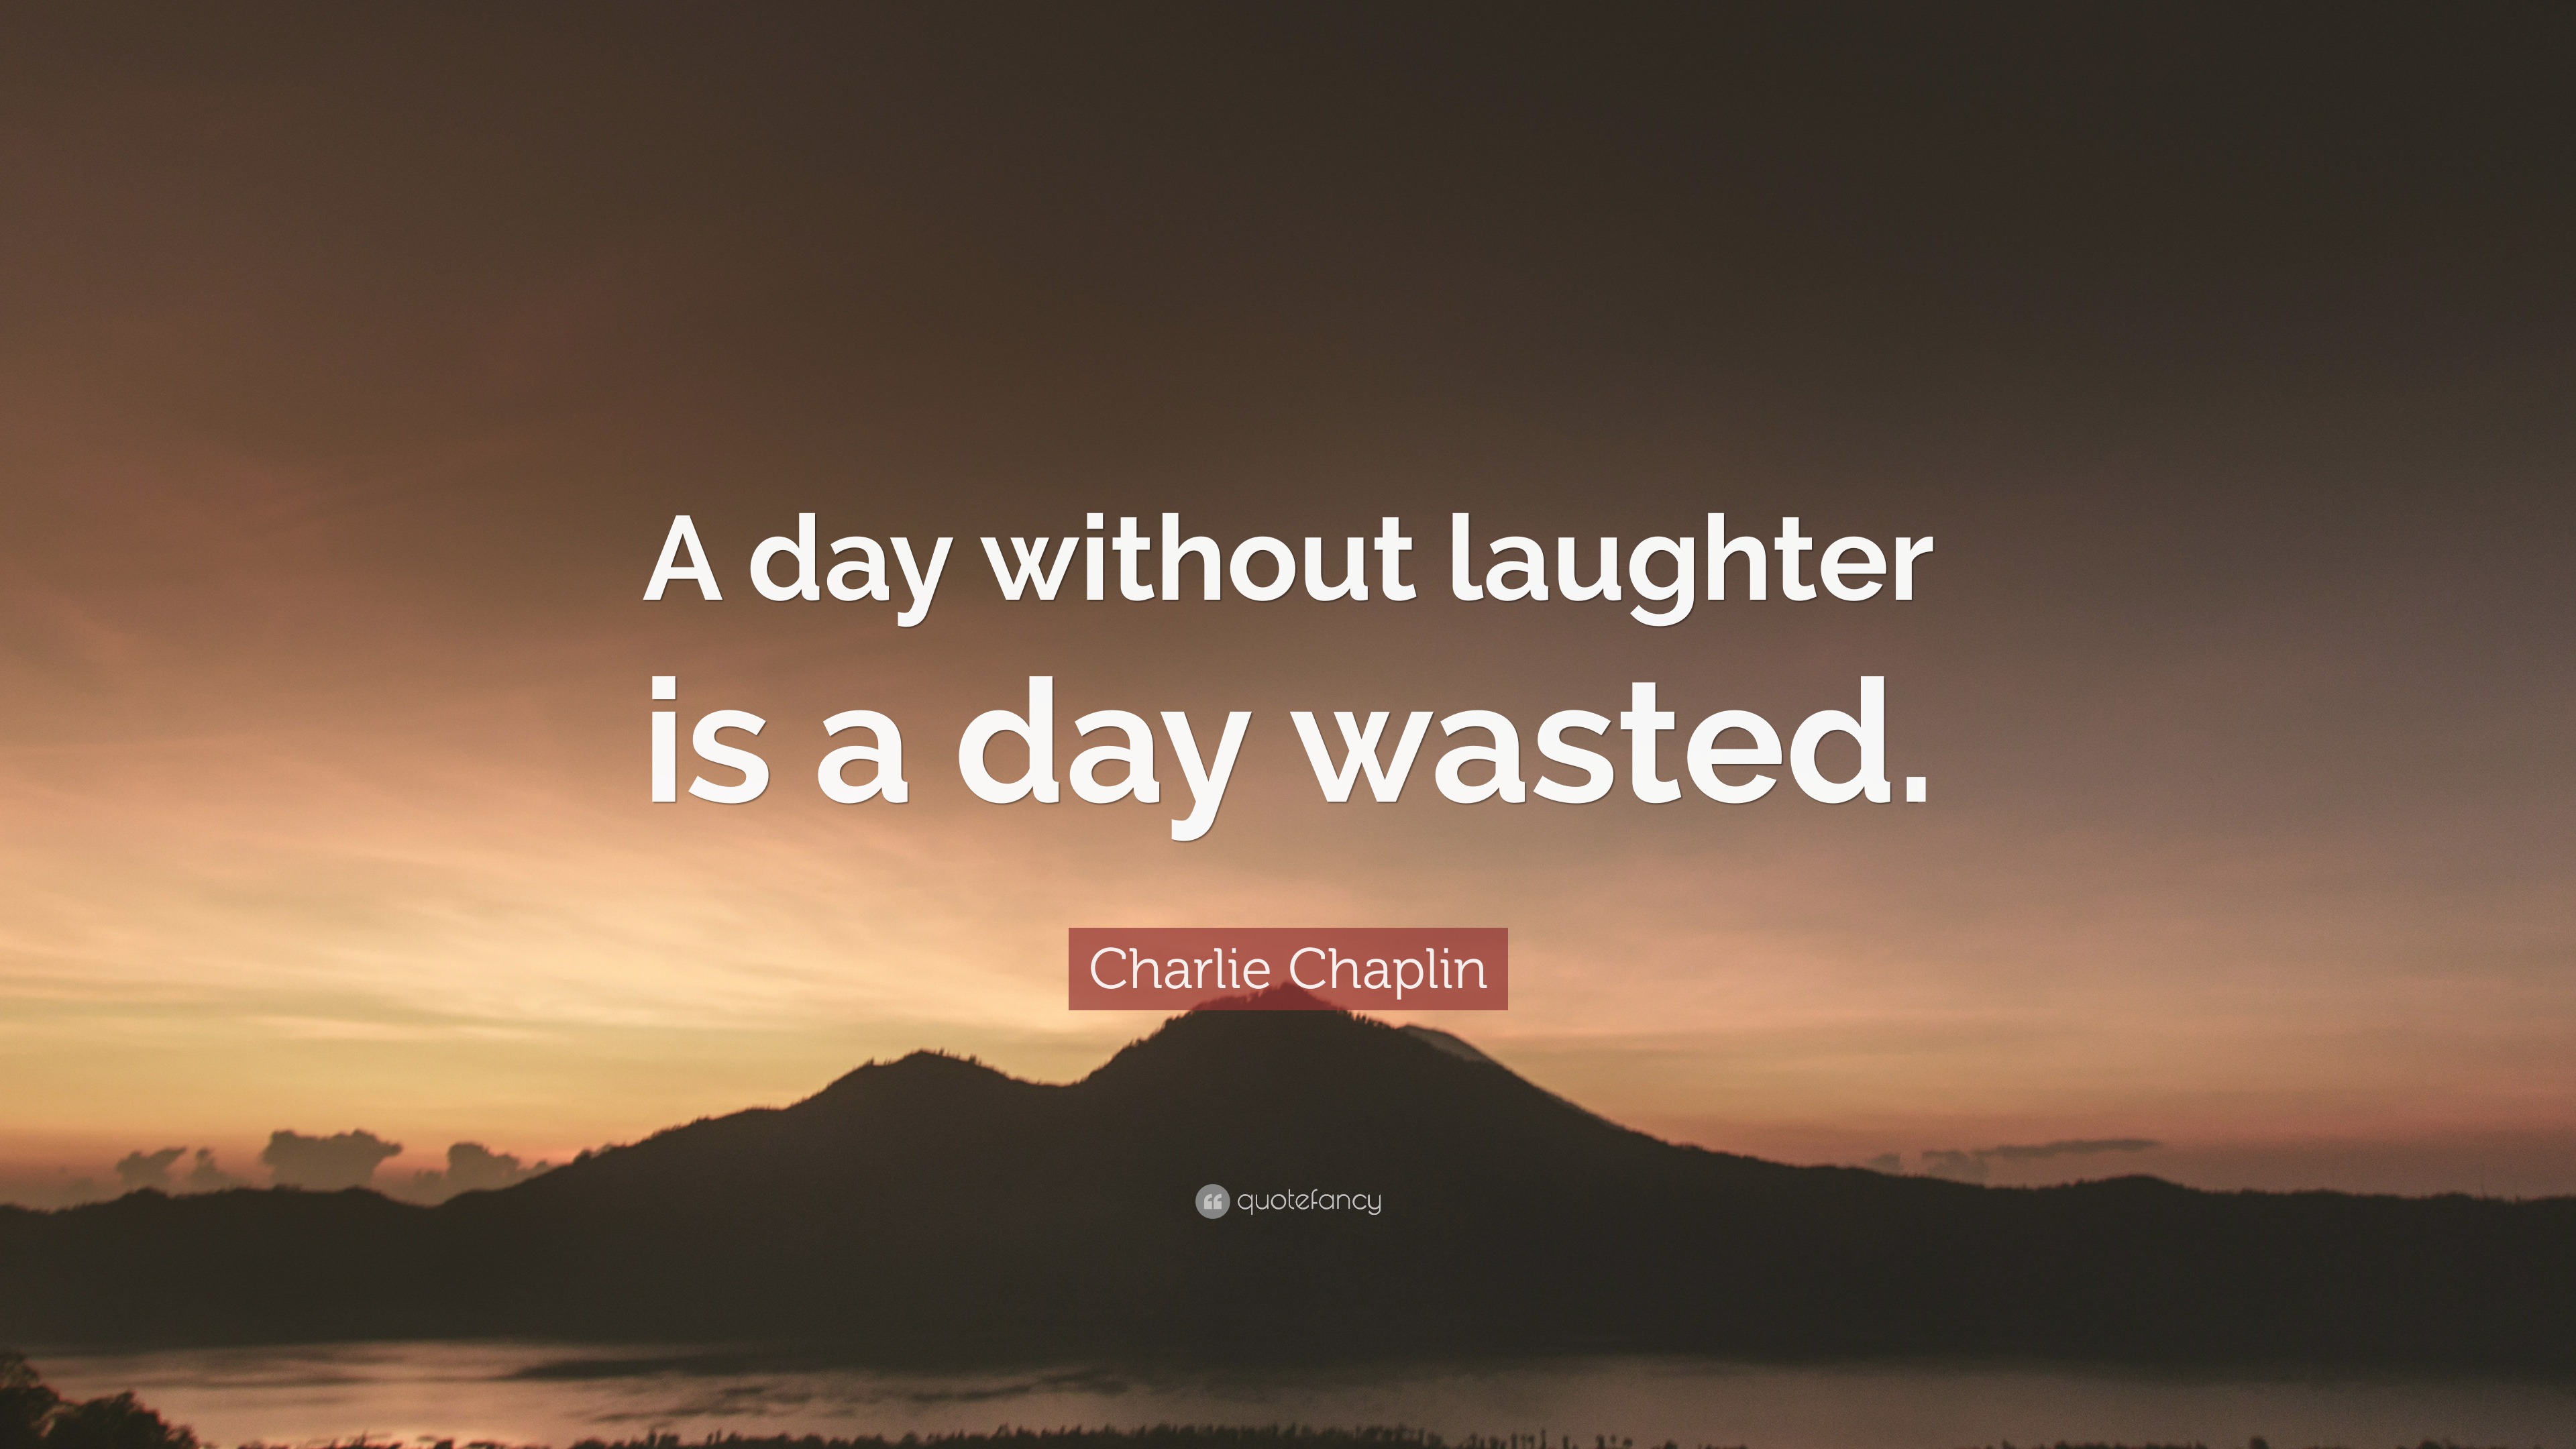 Charlie Chaplin Quote: “A day without laughter is a day wasted.” (12